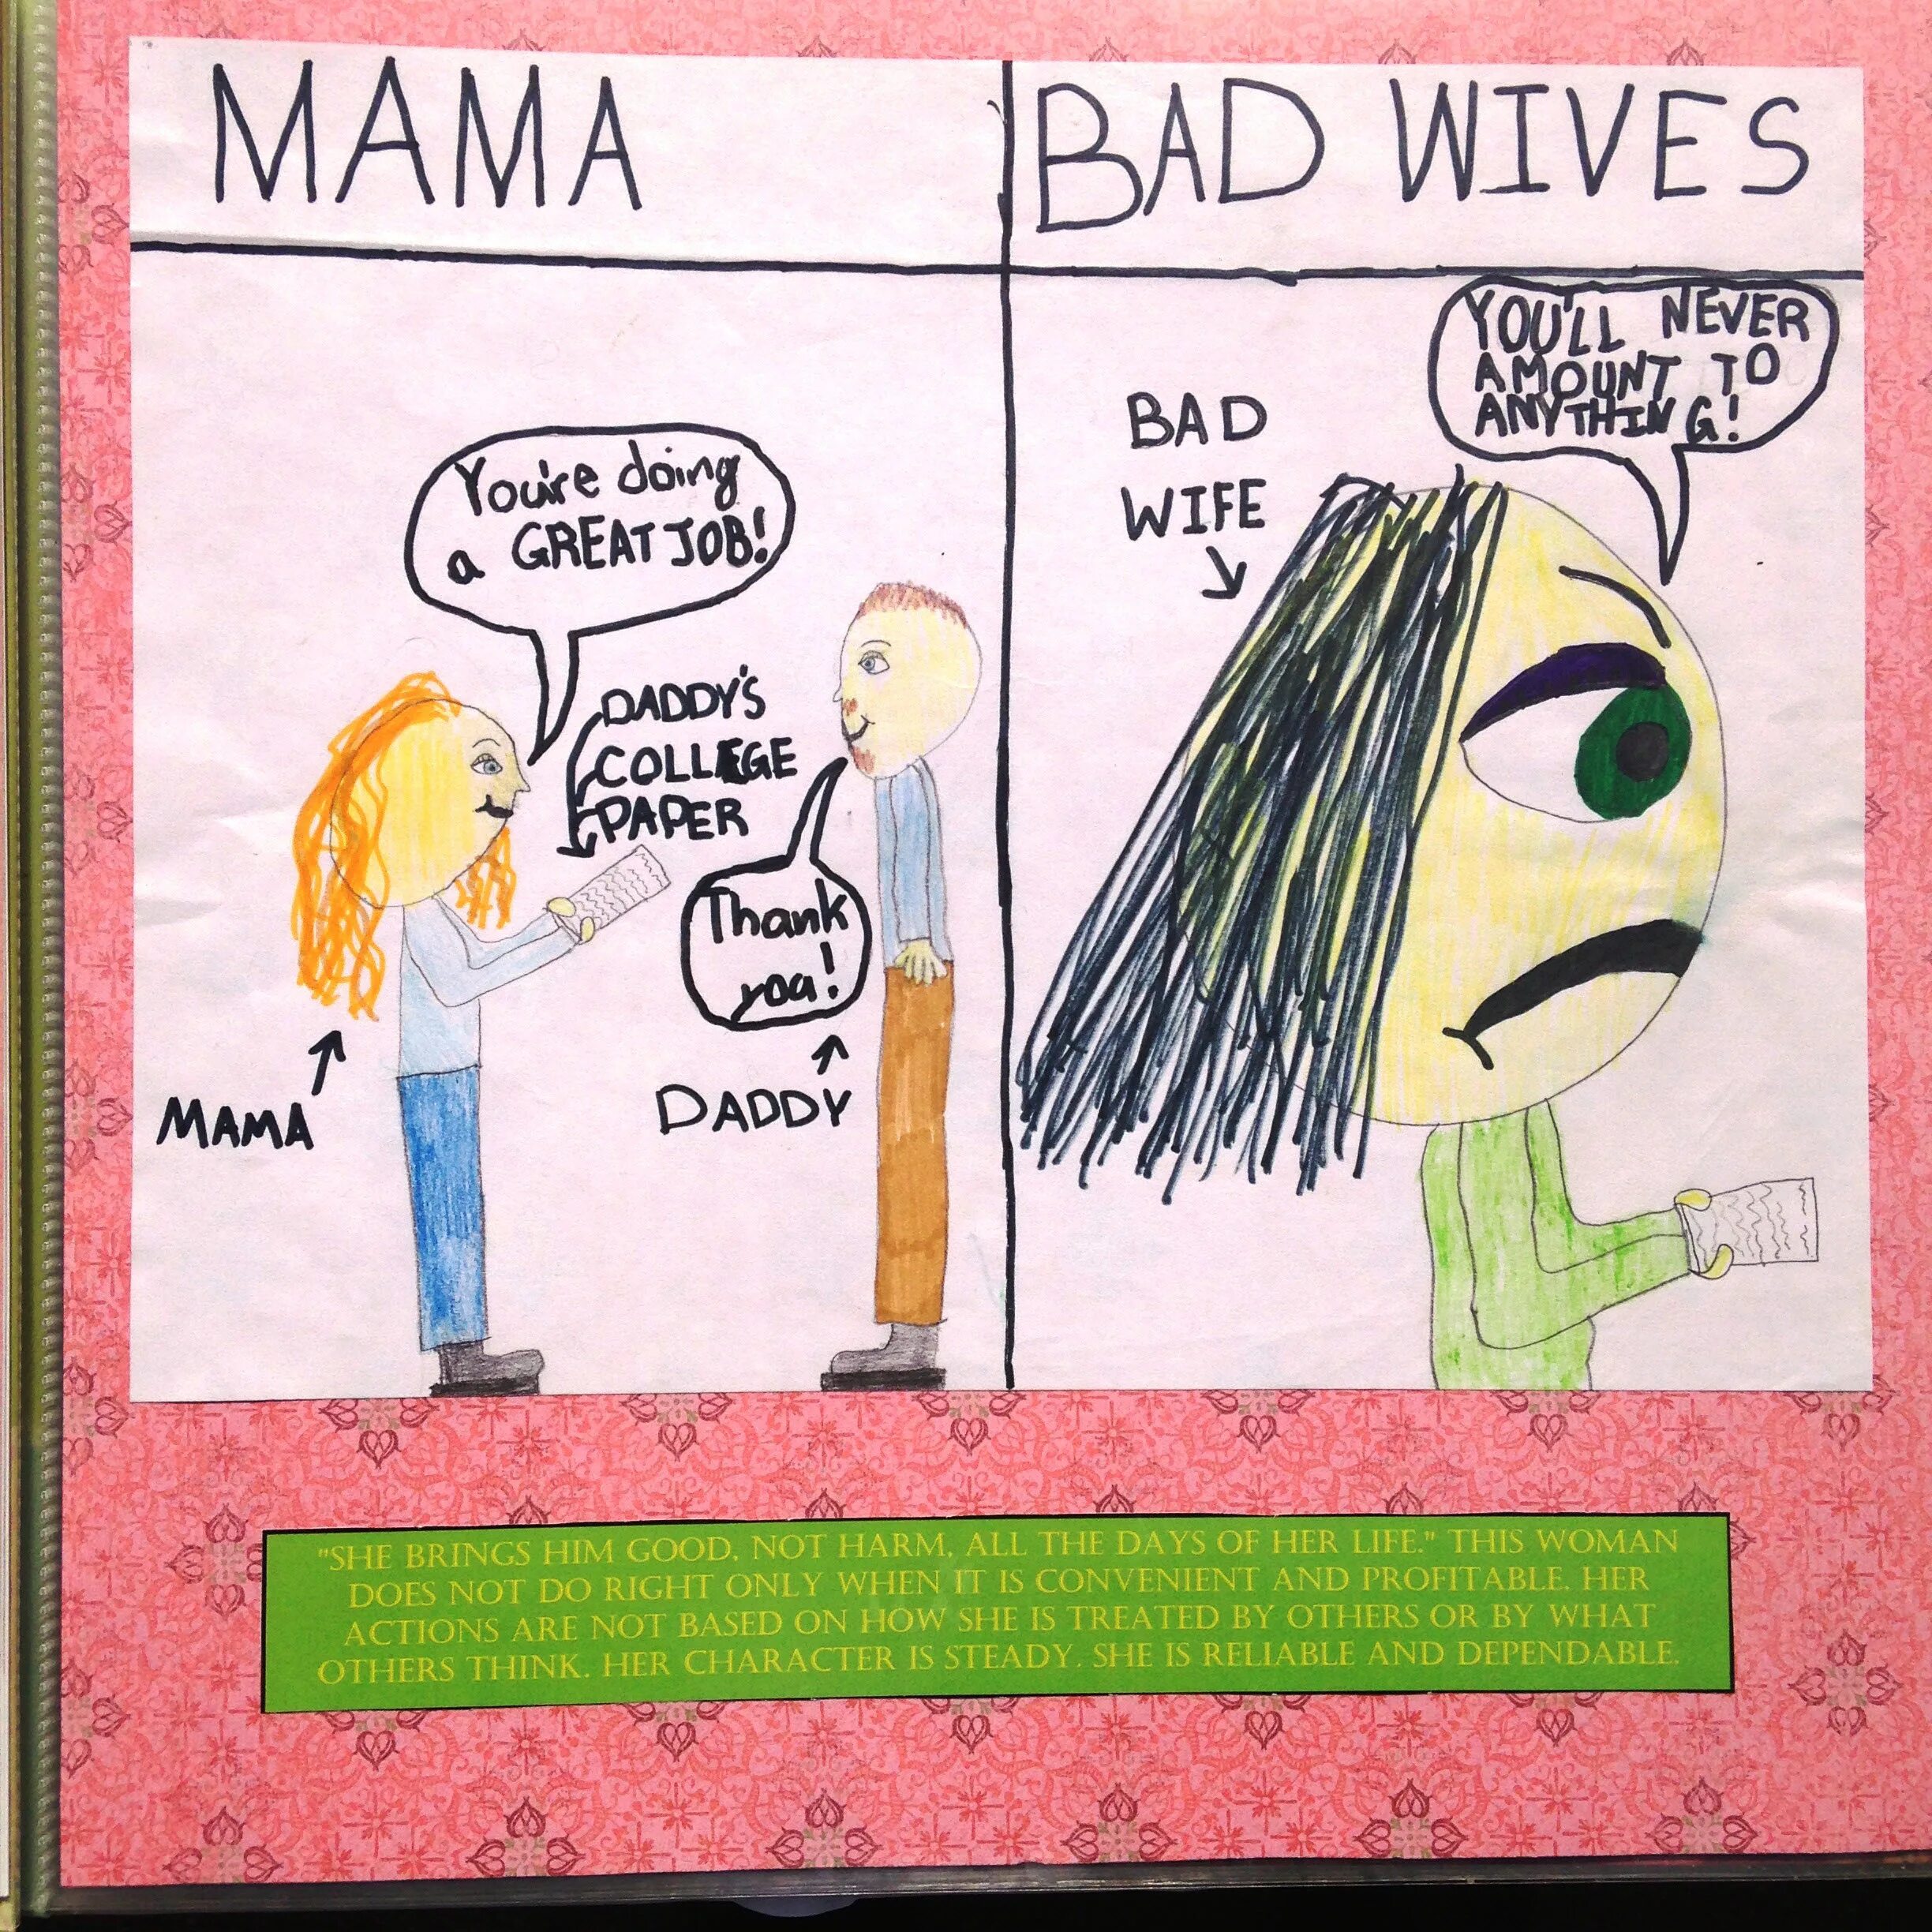 Bad wives. Bad wife. Bad wife twitter. Wife in Bad. Bad wives 2.